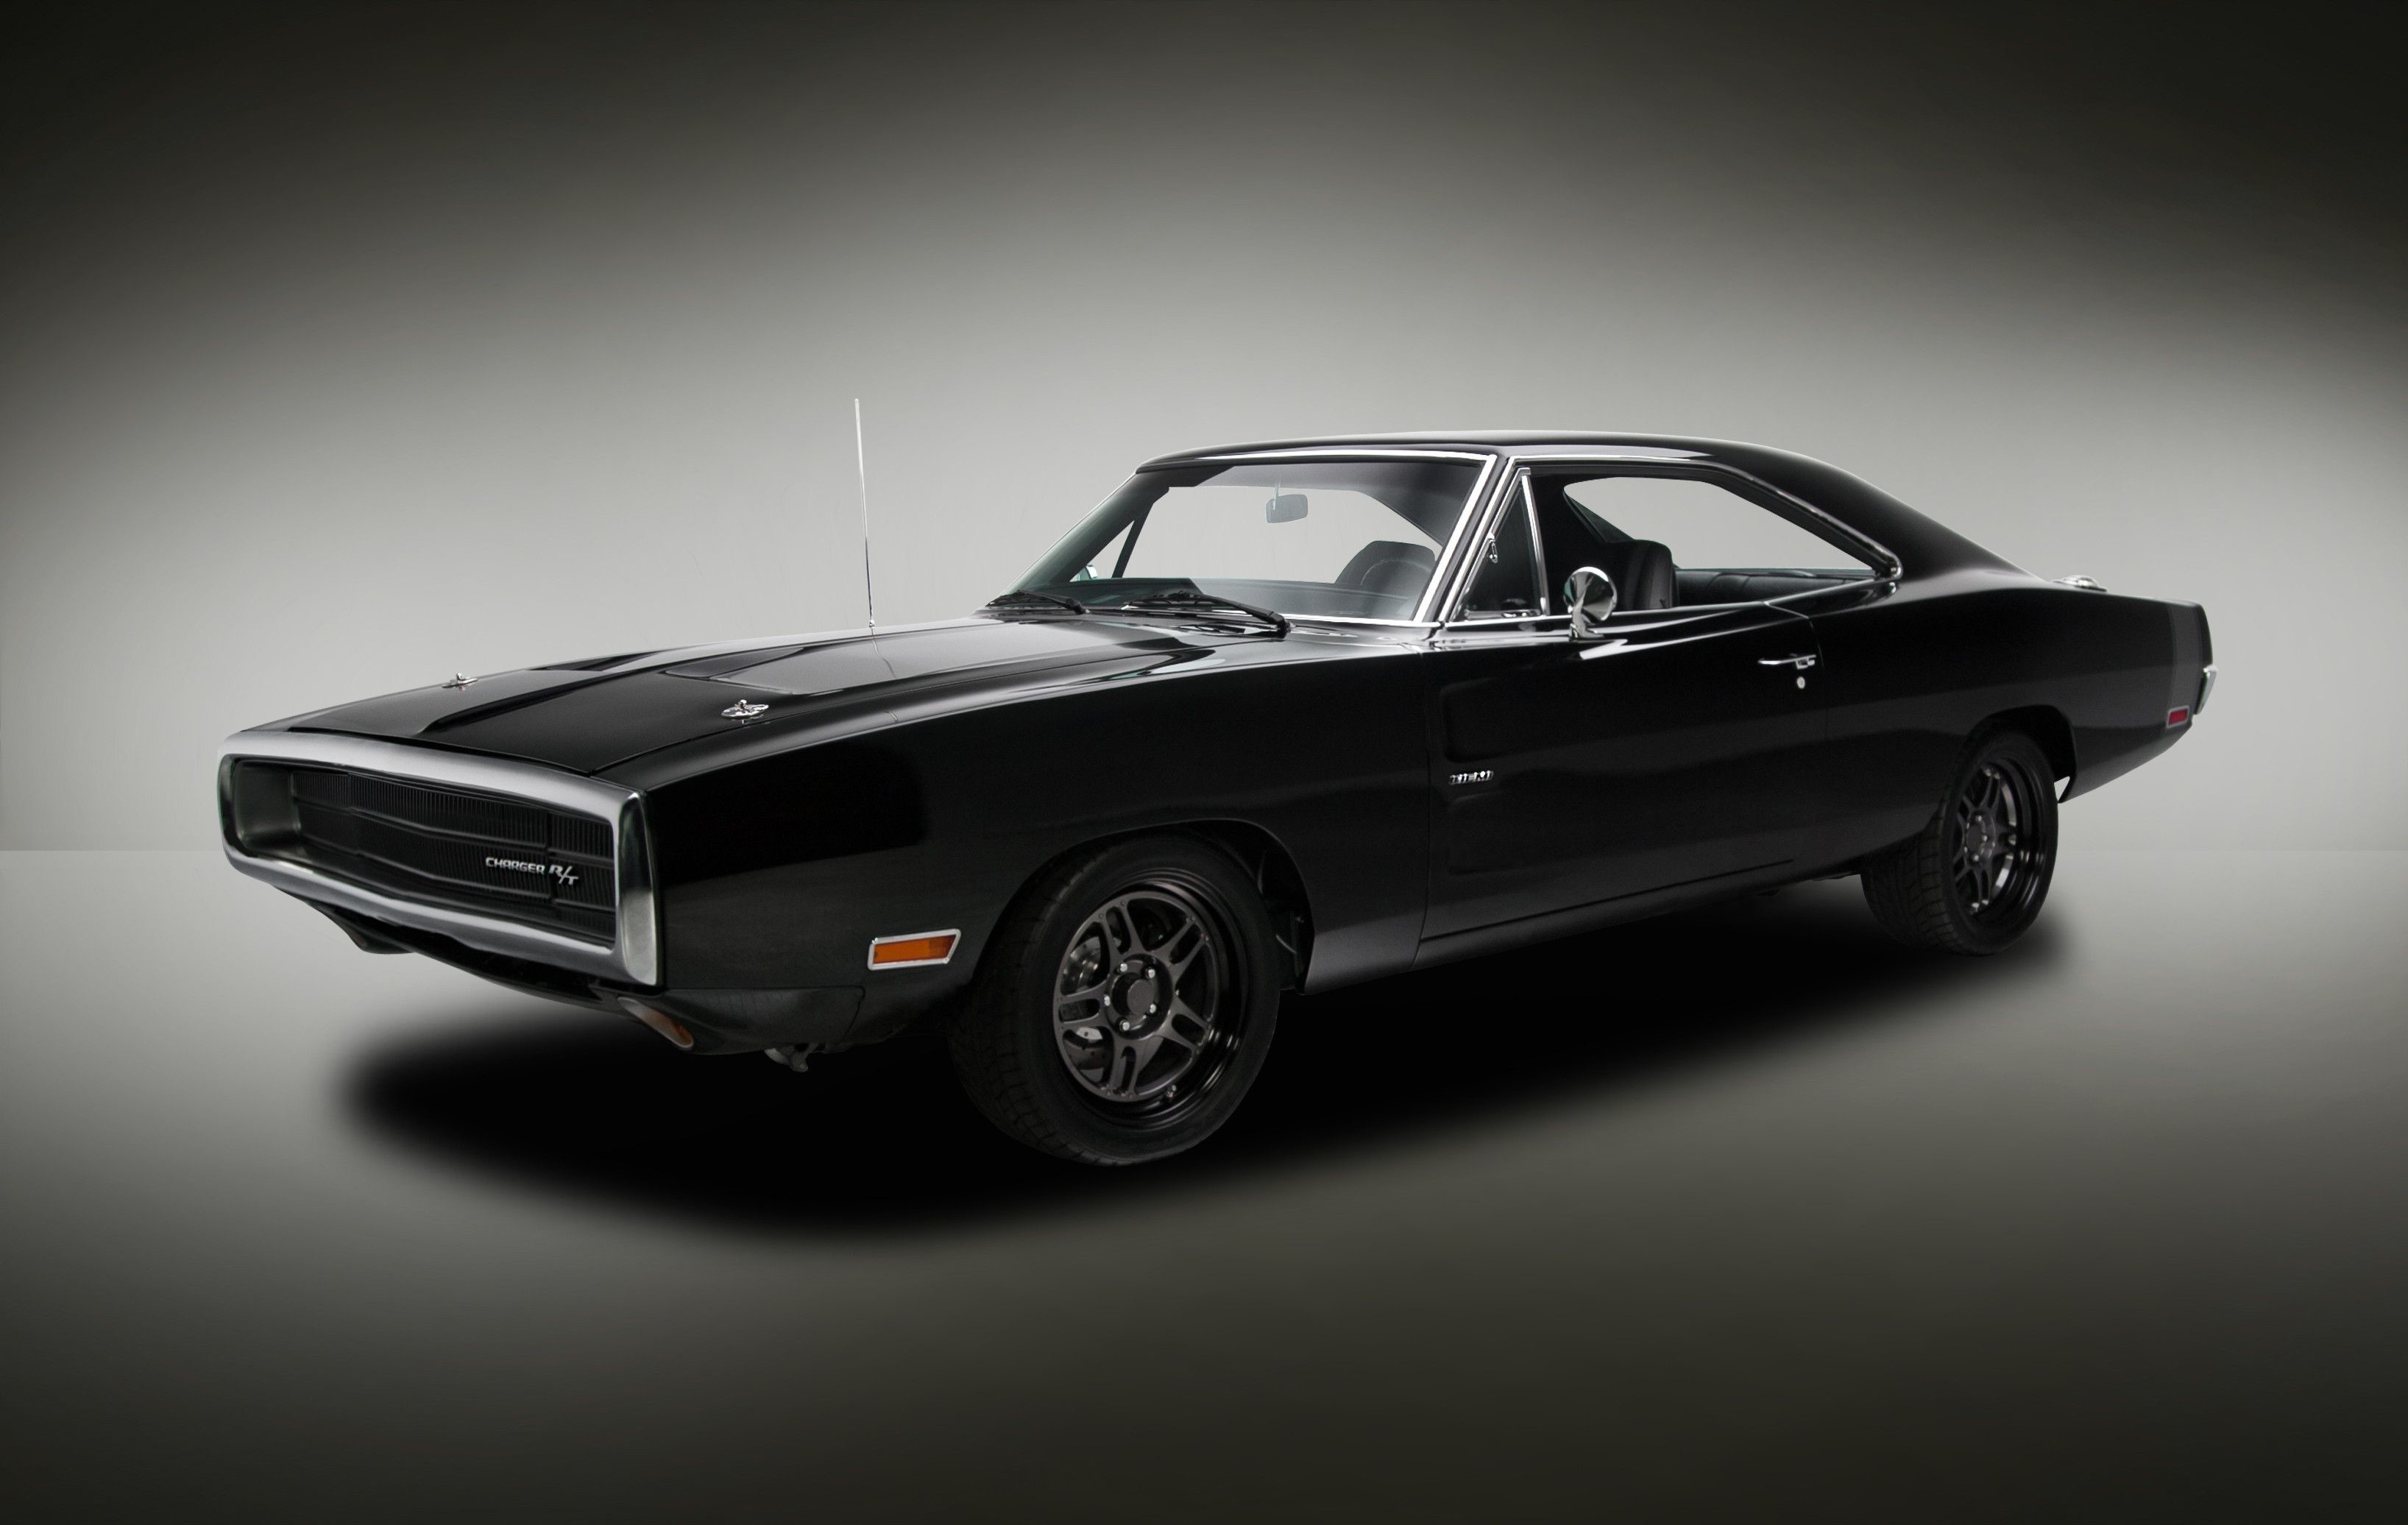 Dodge Charger Wallpaper HD Image